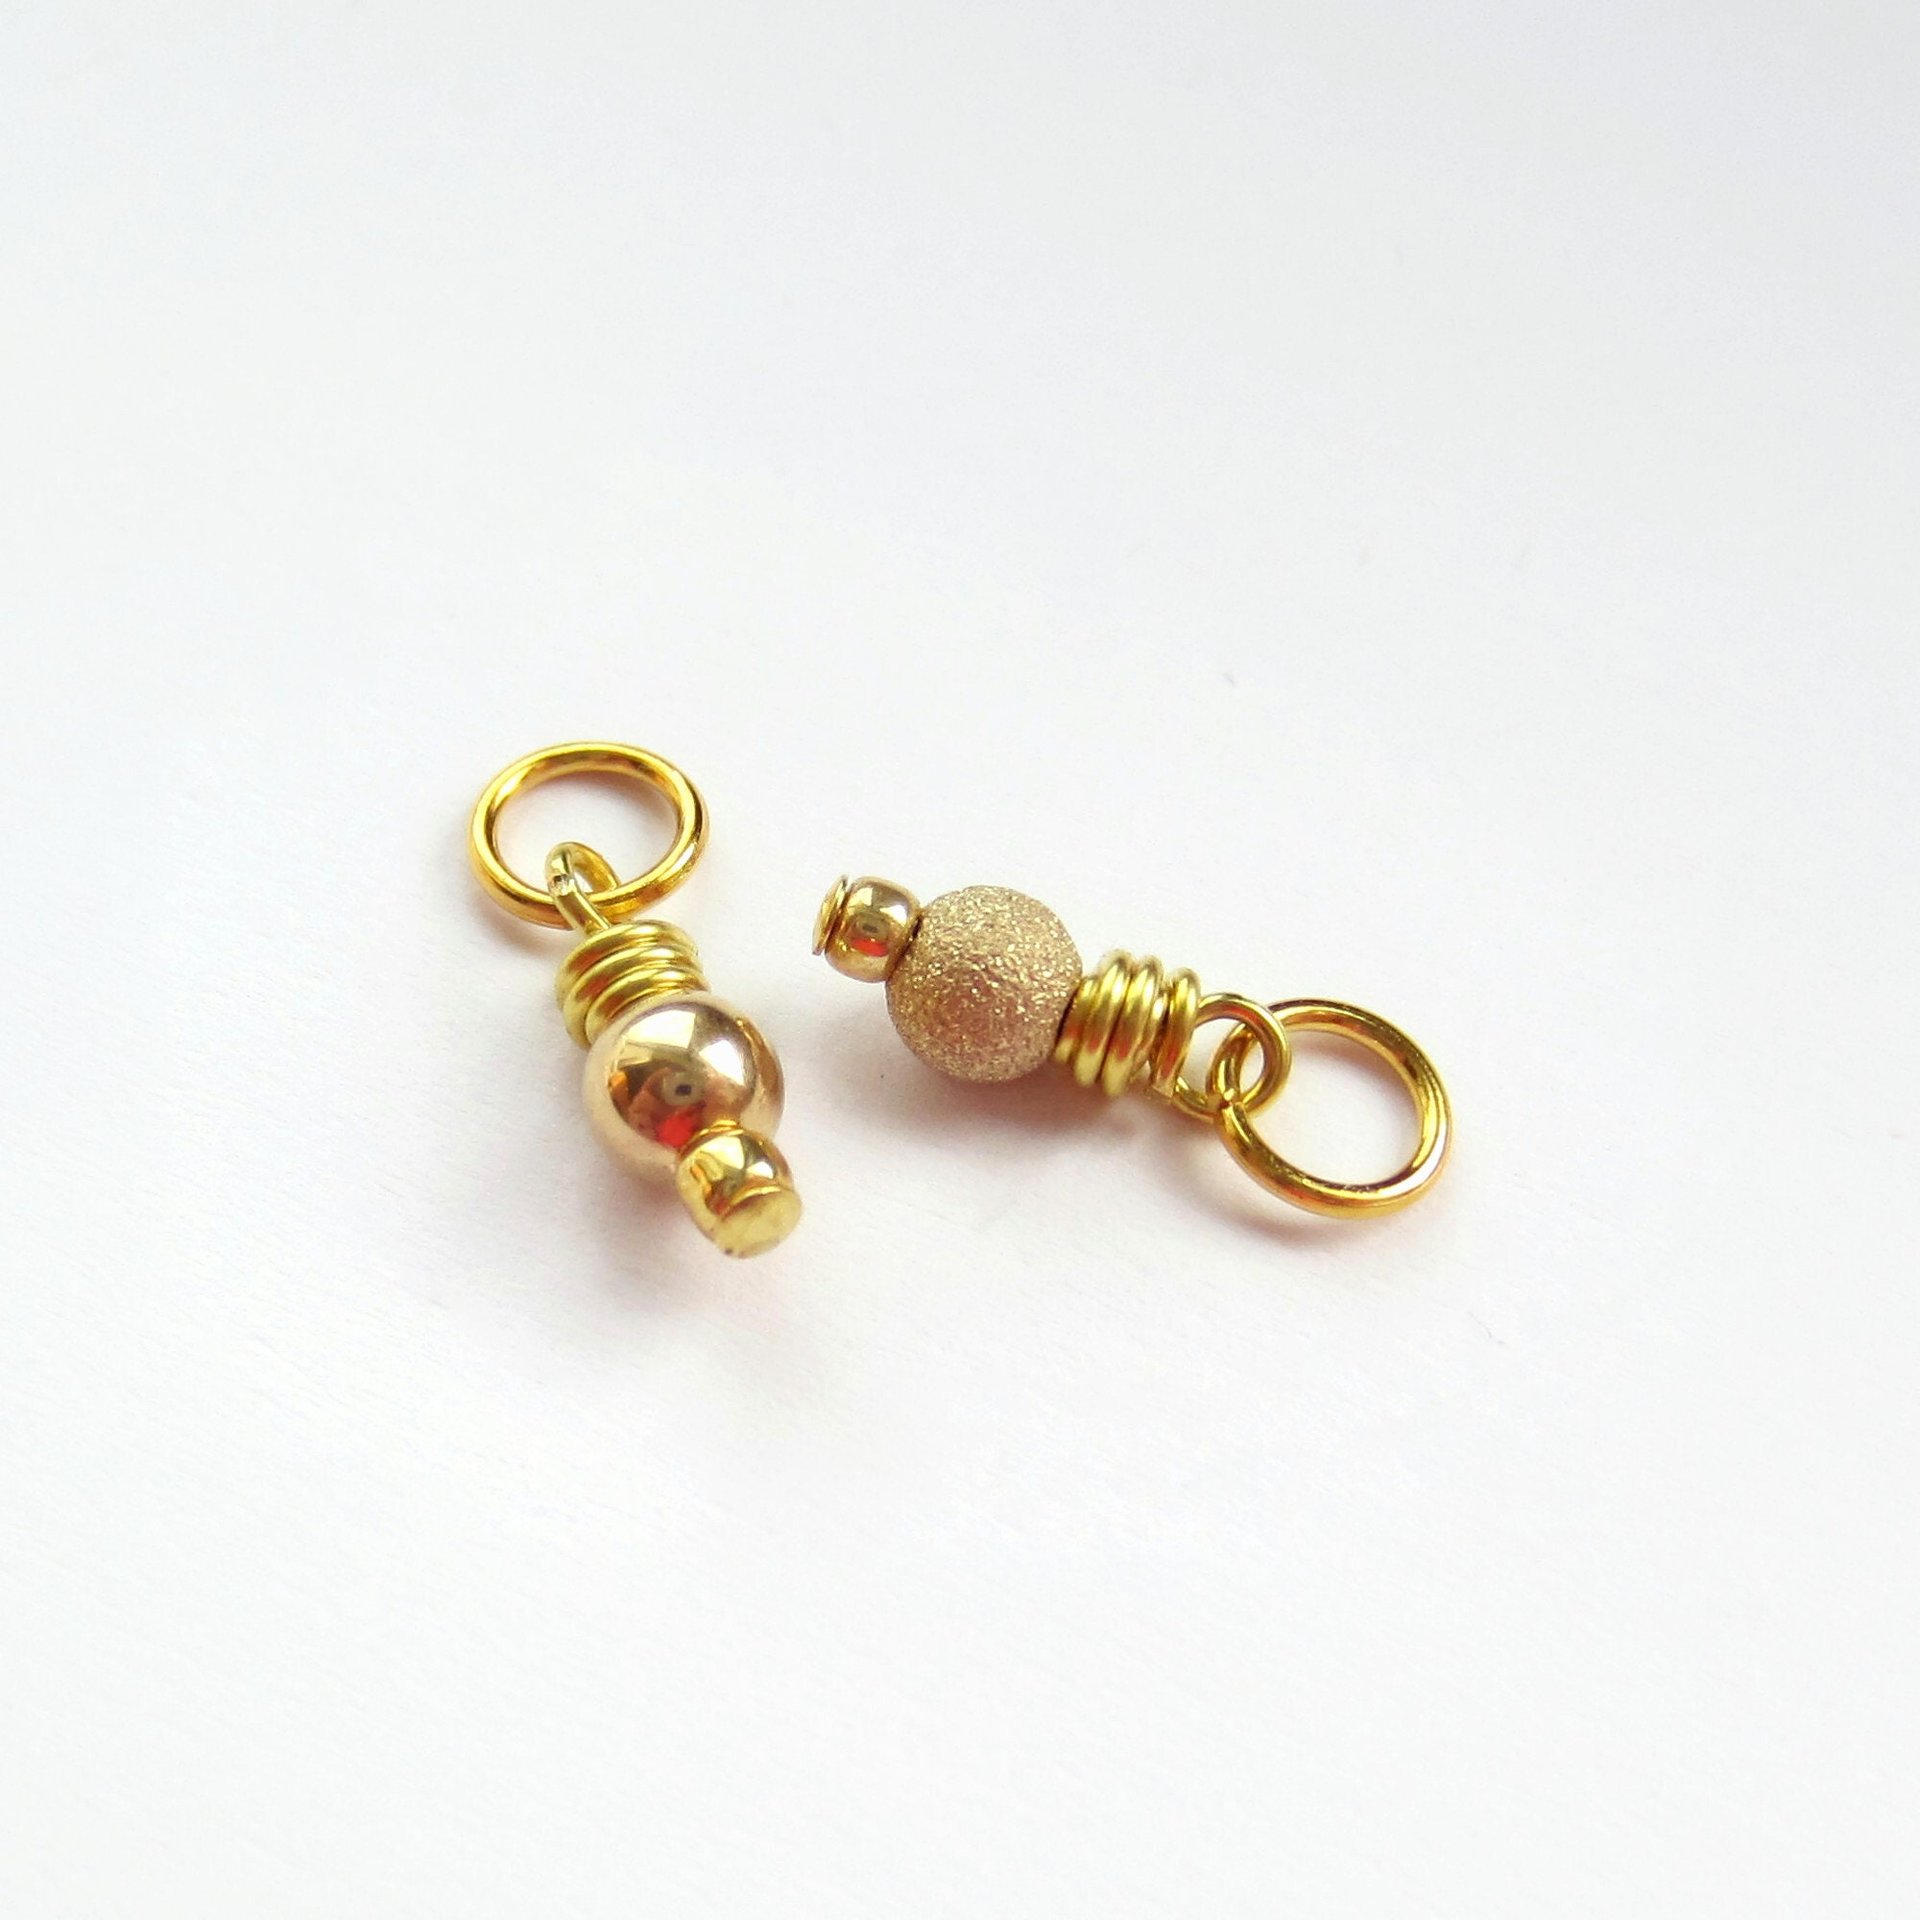 14K Gold Filled Wire Wrapped Bead Charm ~ Shiny or Frosted Stardust Finish ~ Handmade by The Tiny Tree Frog Jewellery